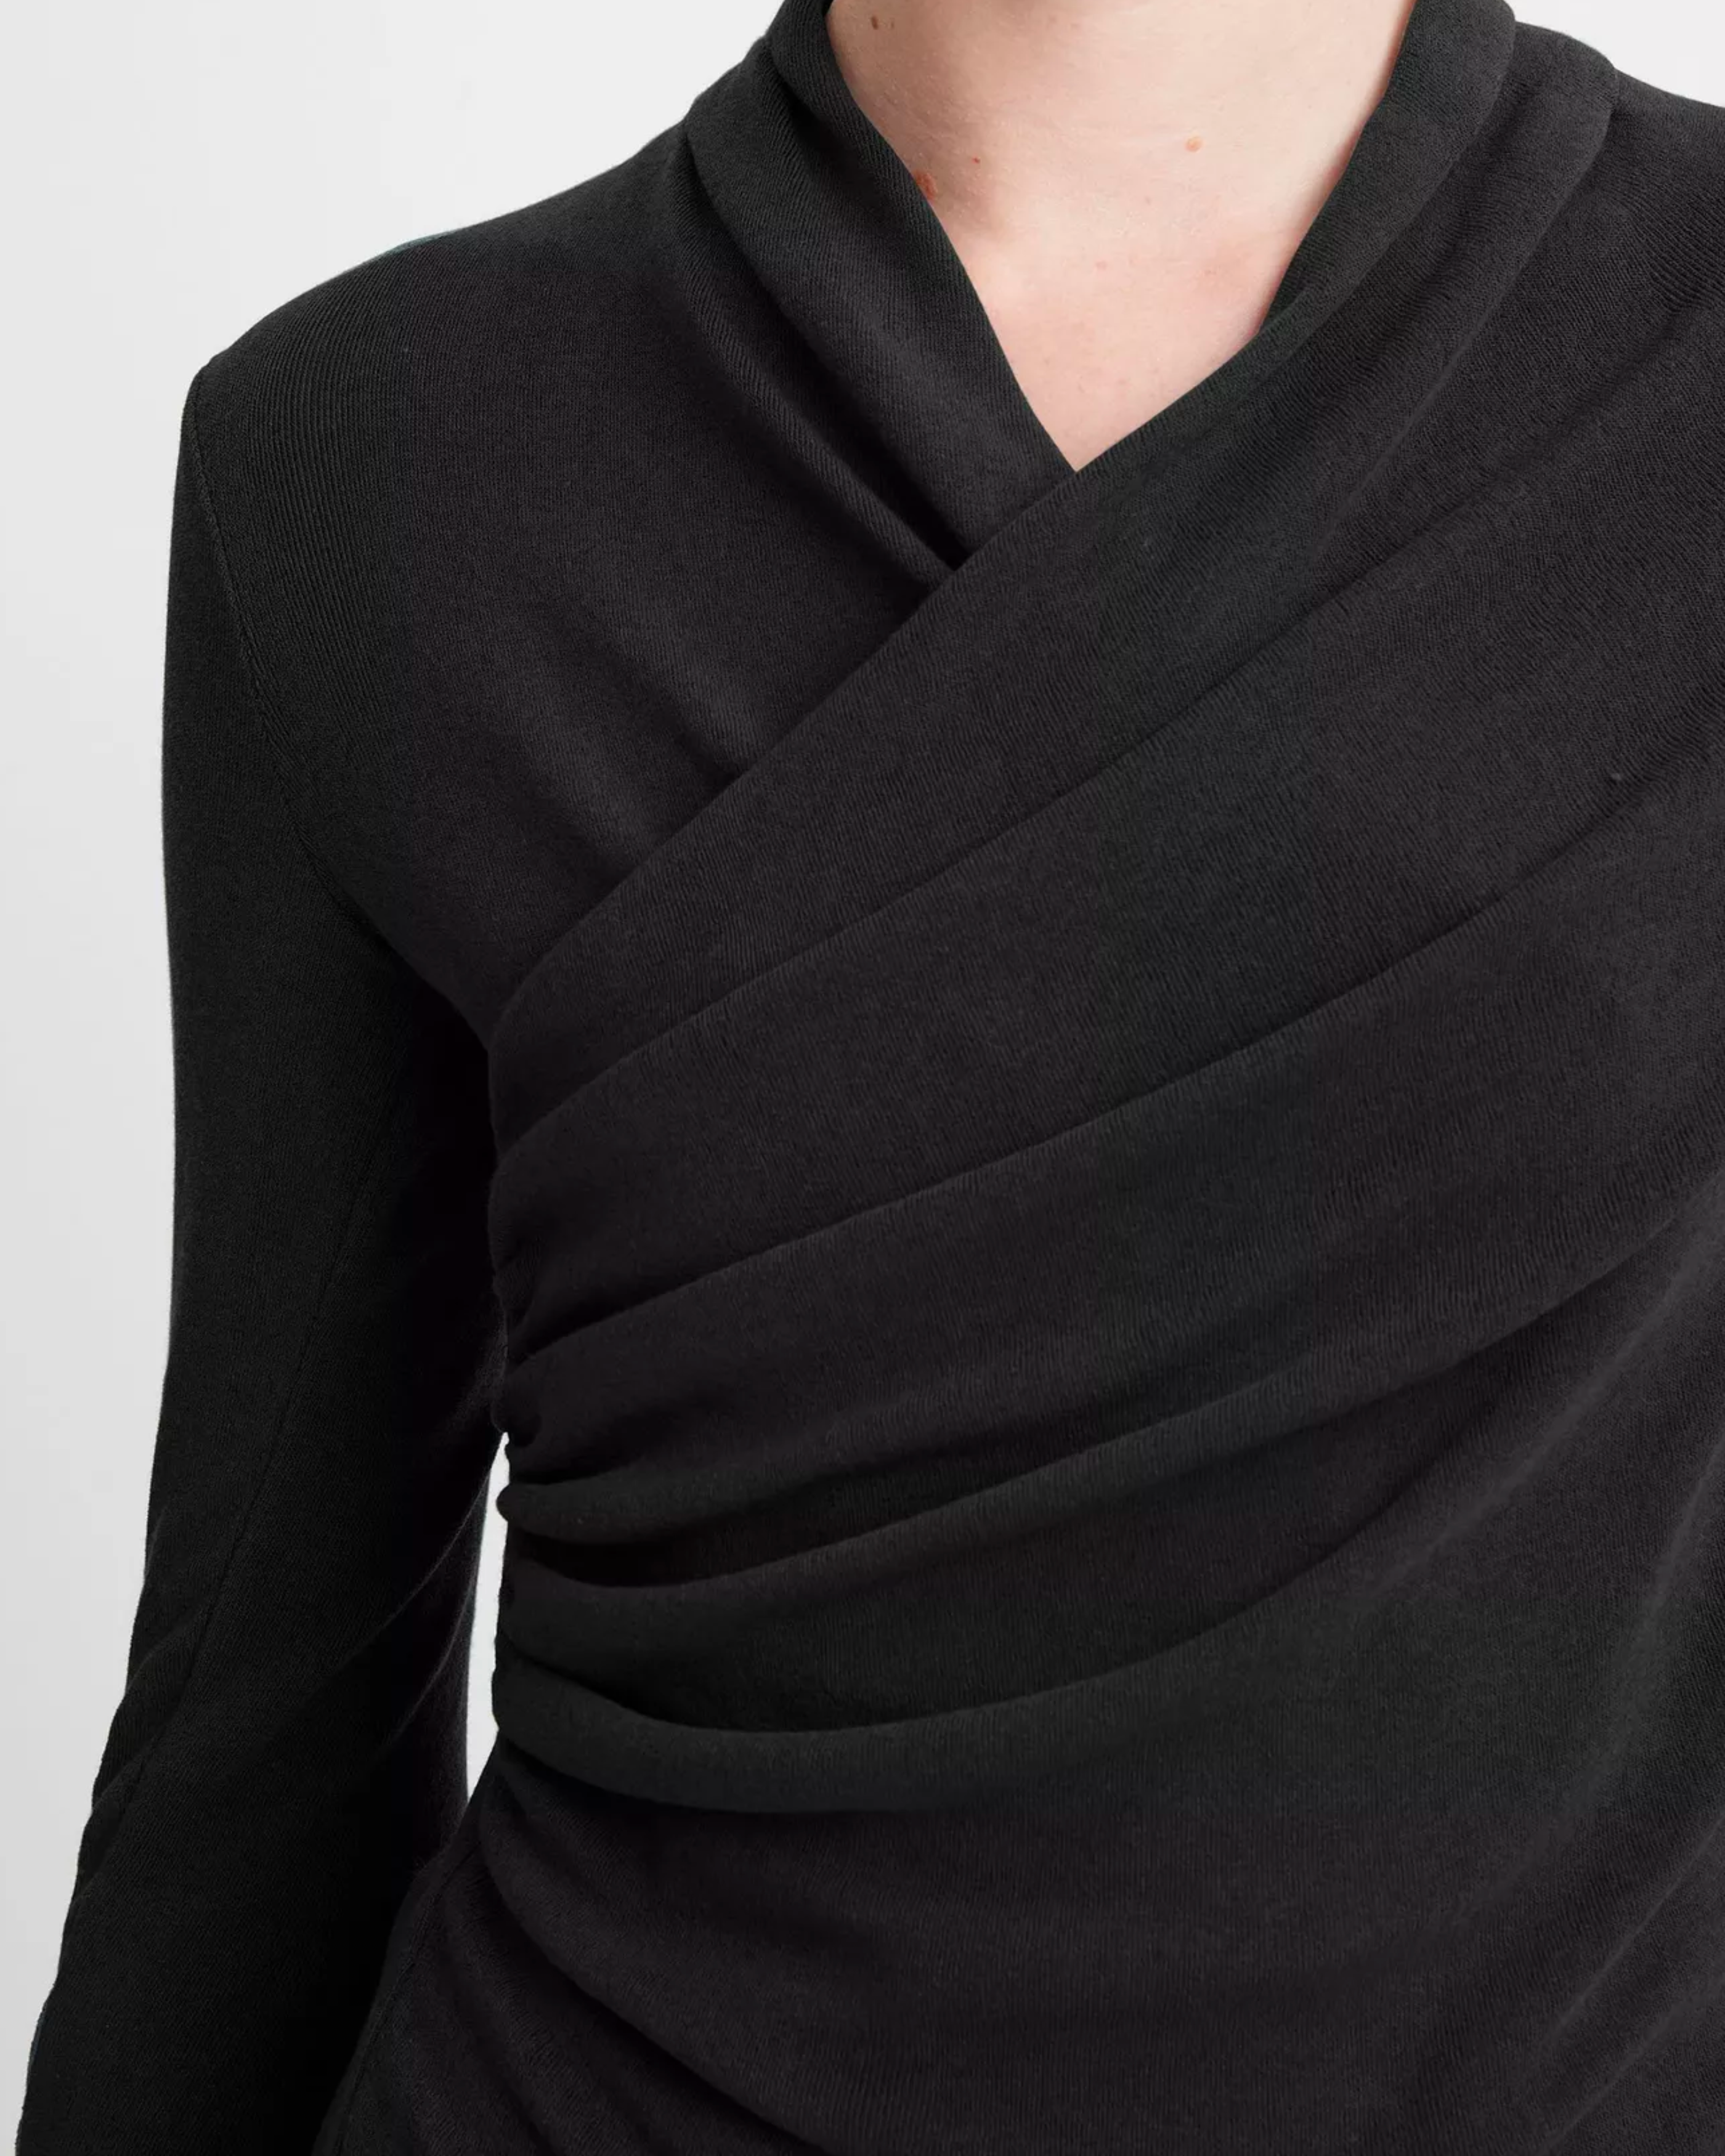 Vince Fixed Wrap Top in Black